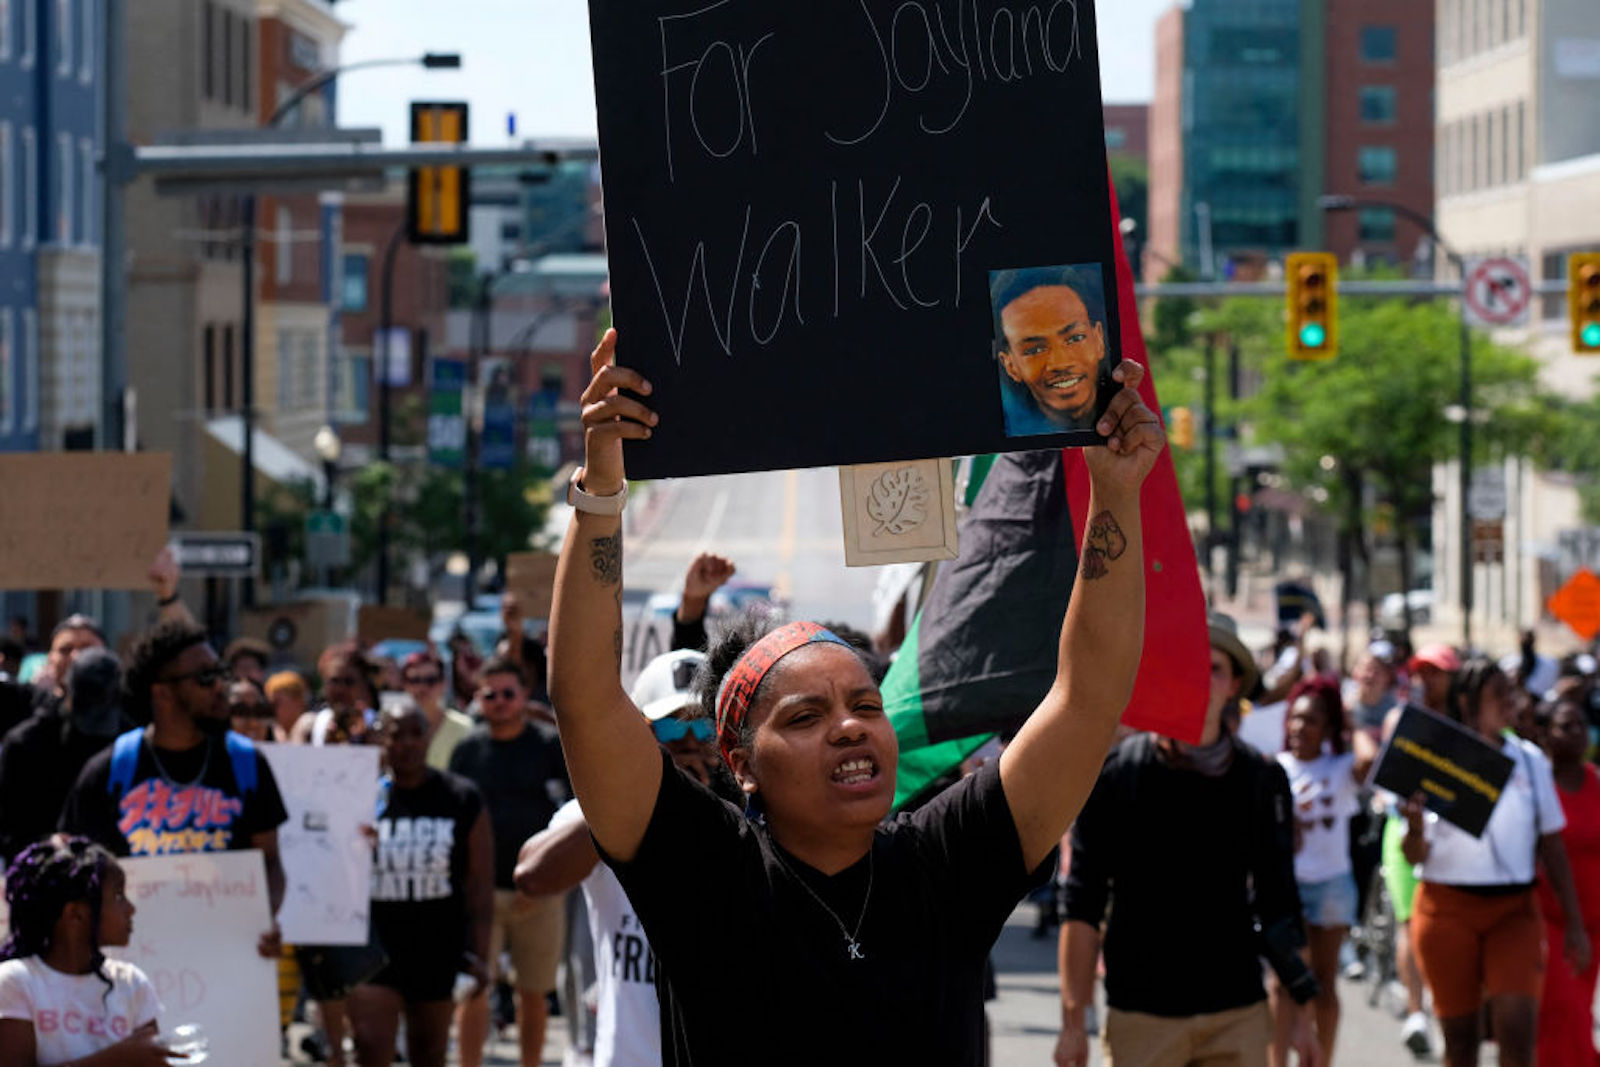 Jayland Walker had at least 60 shots fired in police shootings